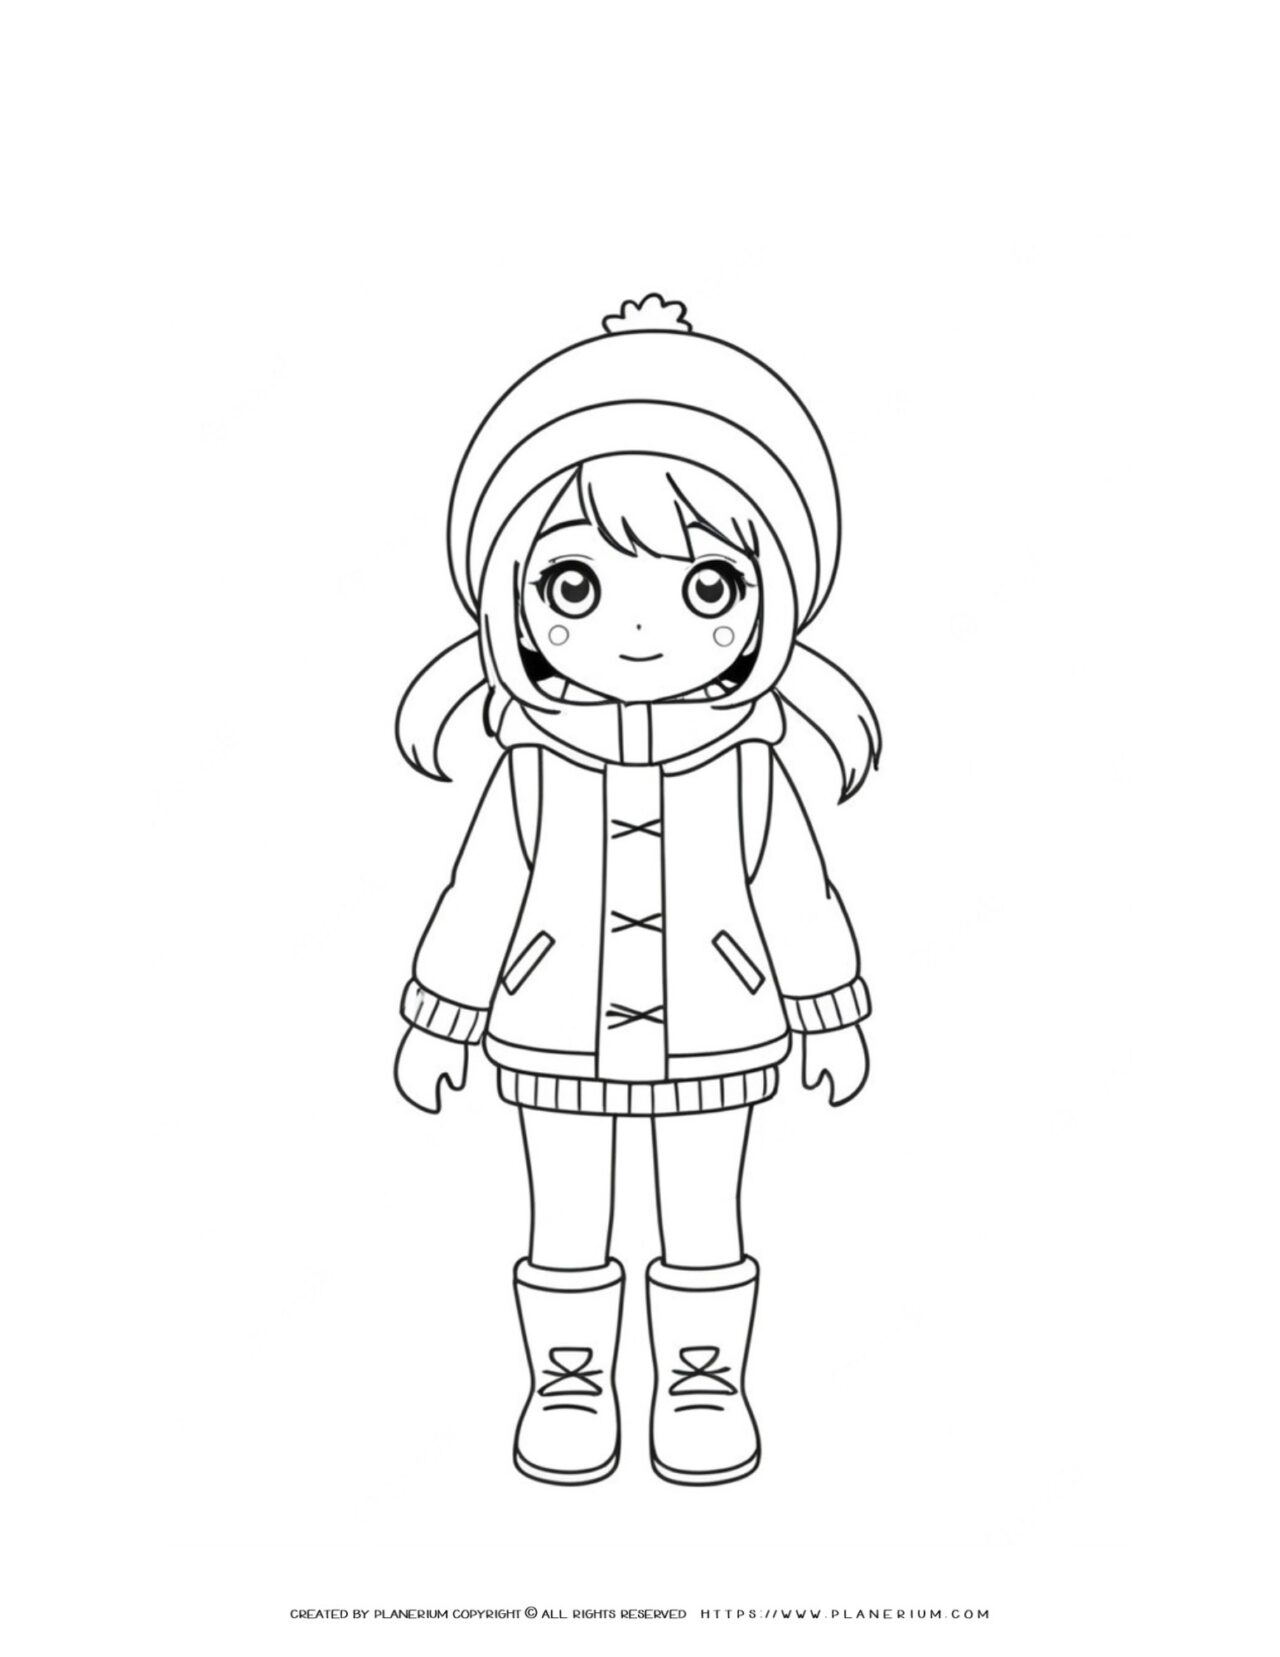 winter-girl-anime-style-coloring-page-for-kids